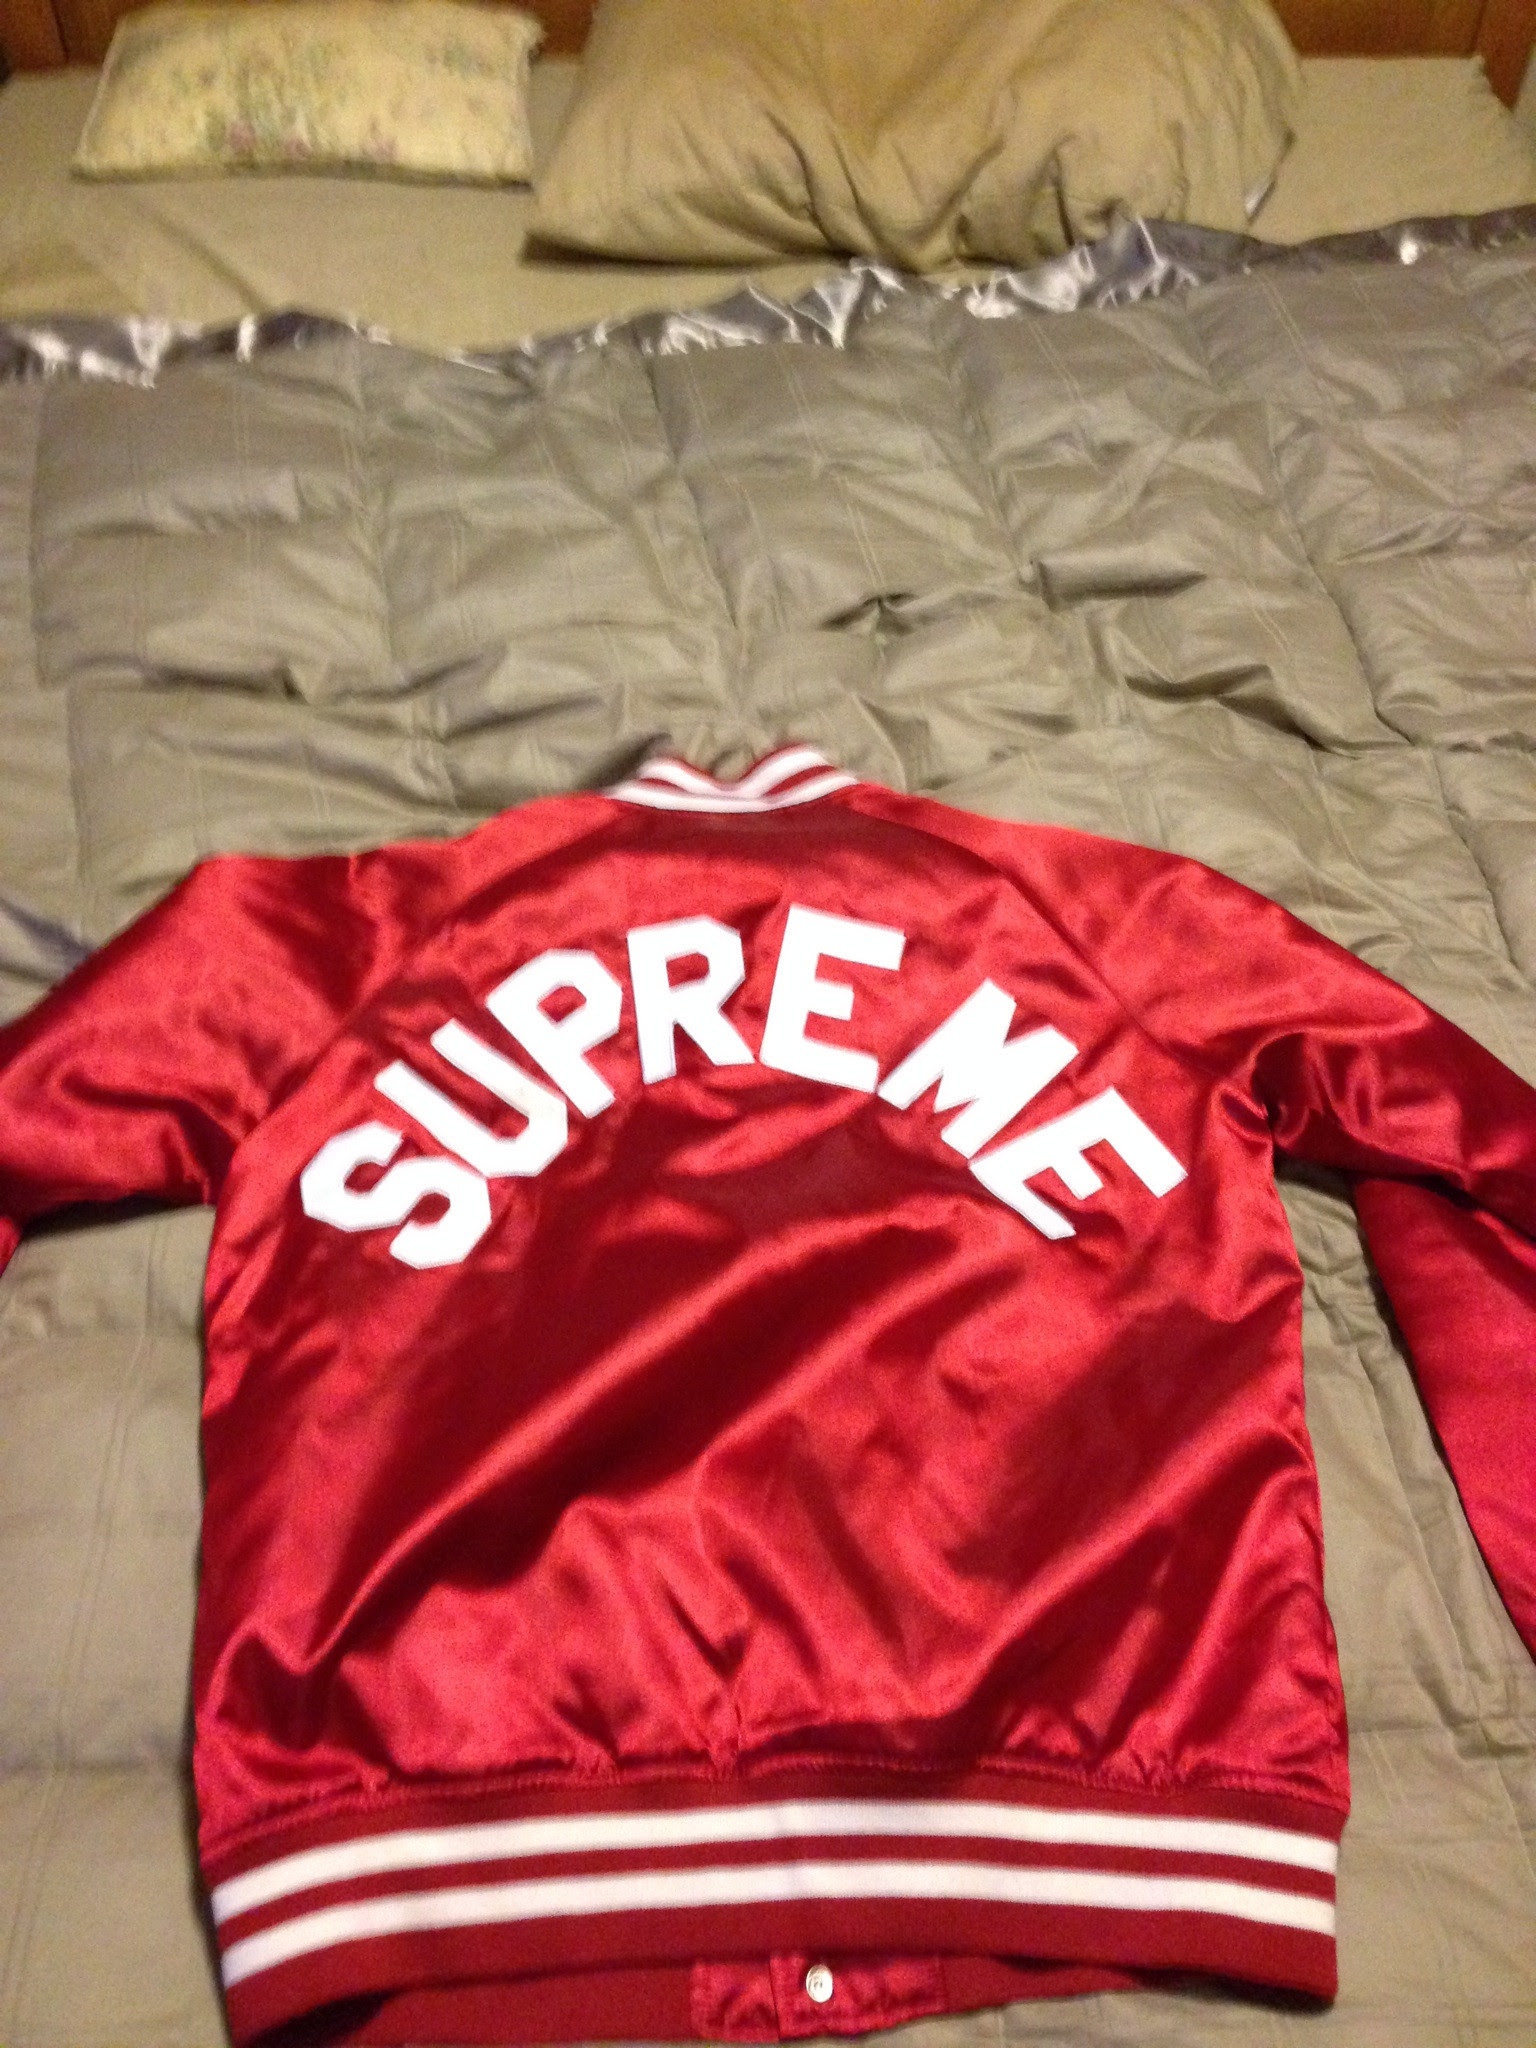 Cheap Supreme Clothing - Clothes Size